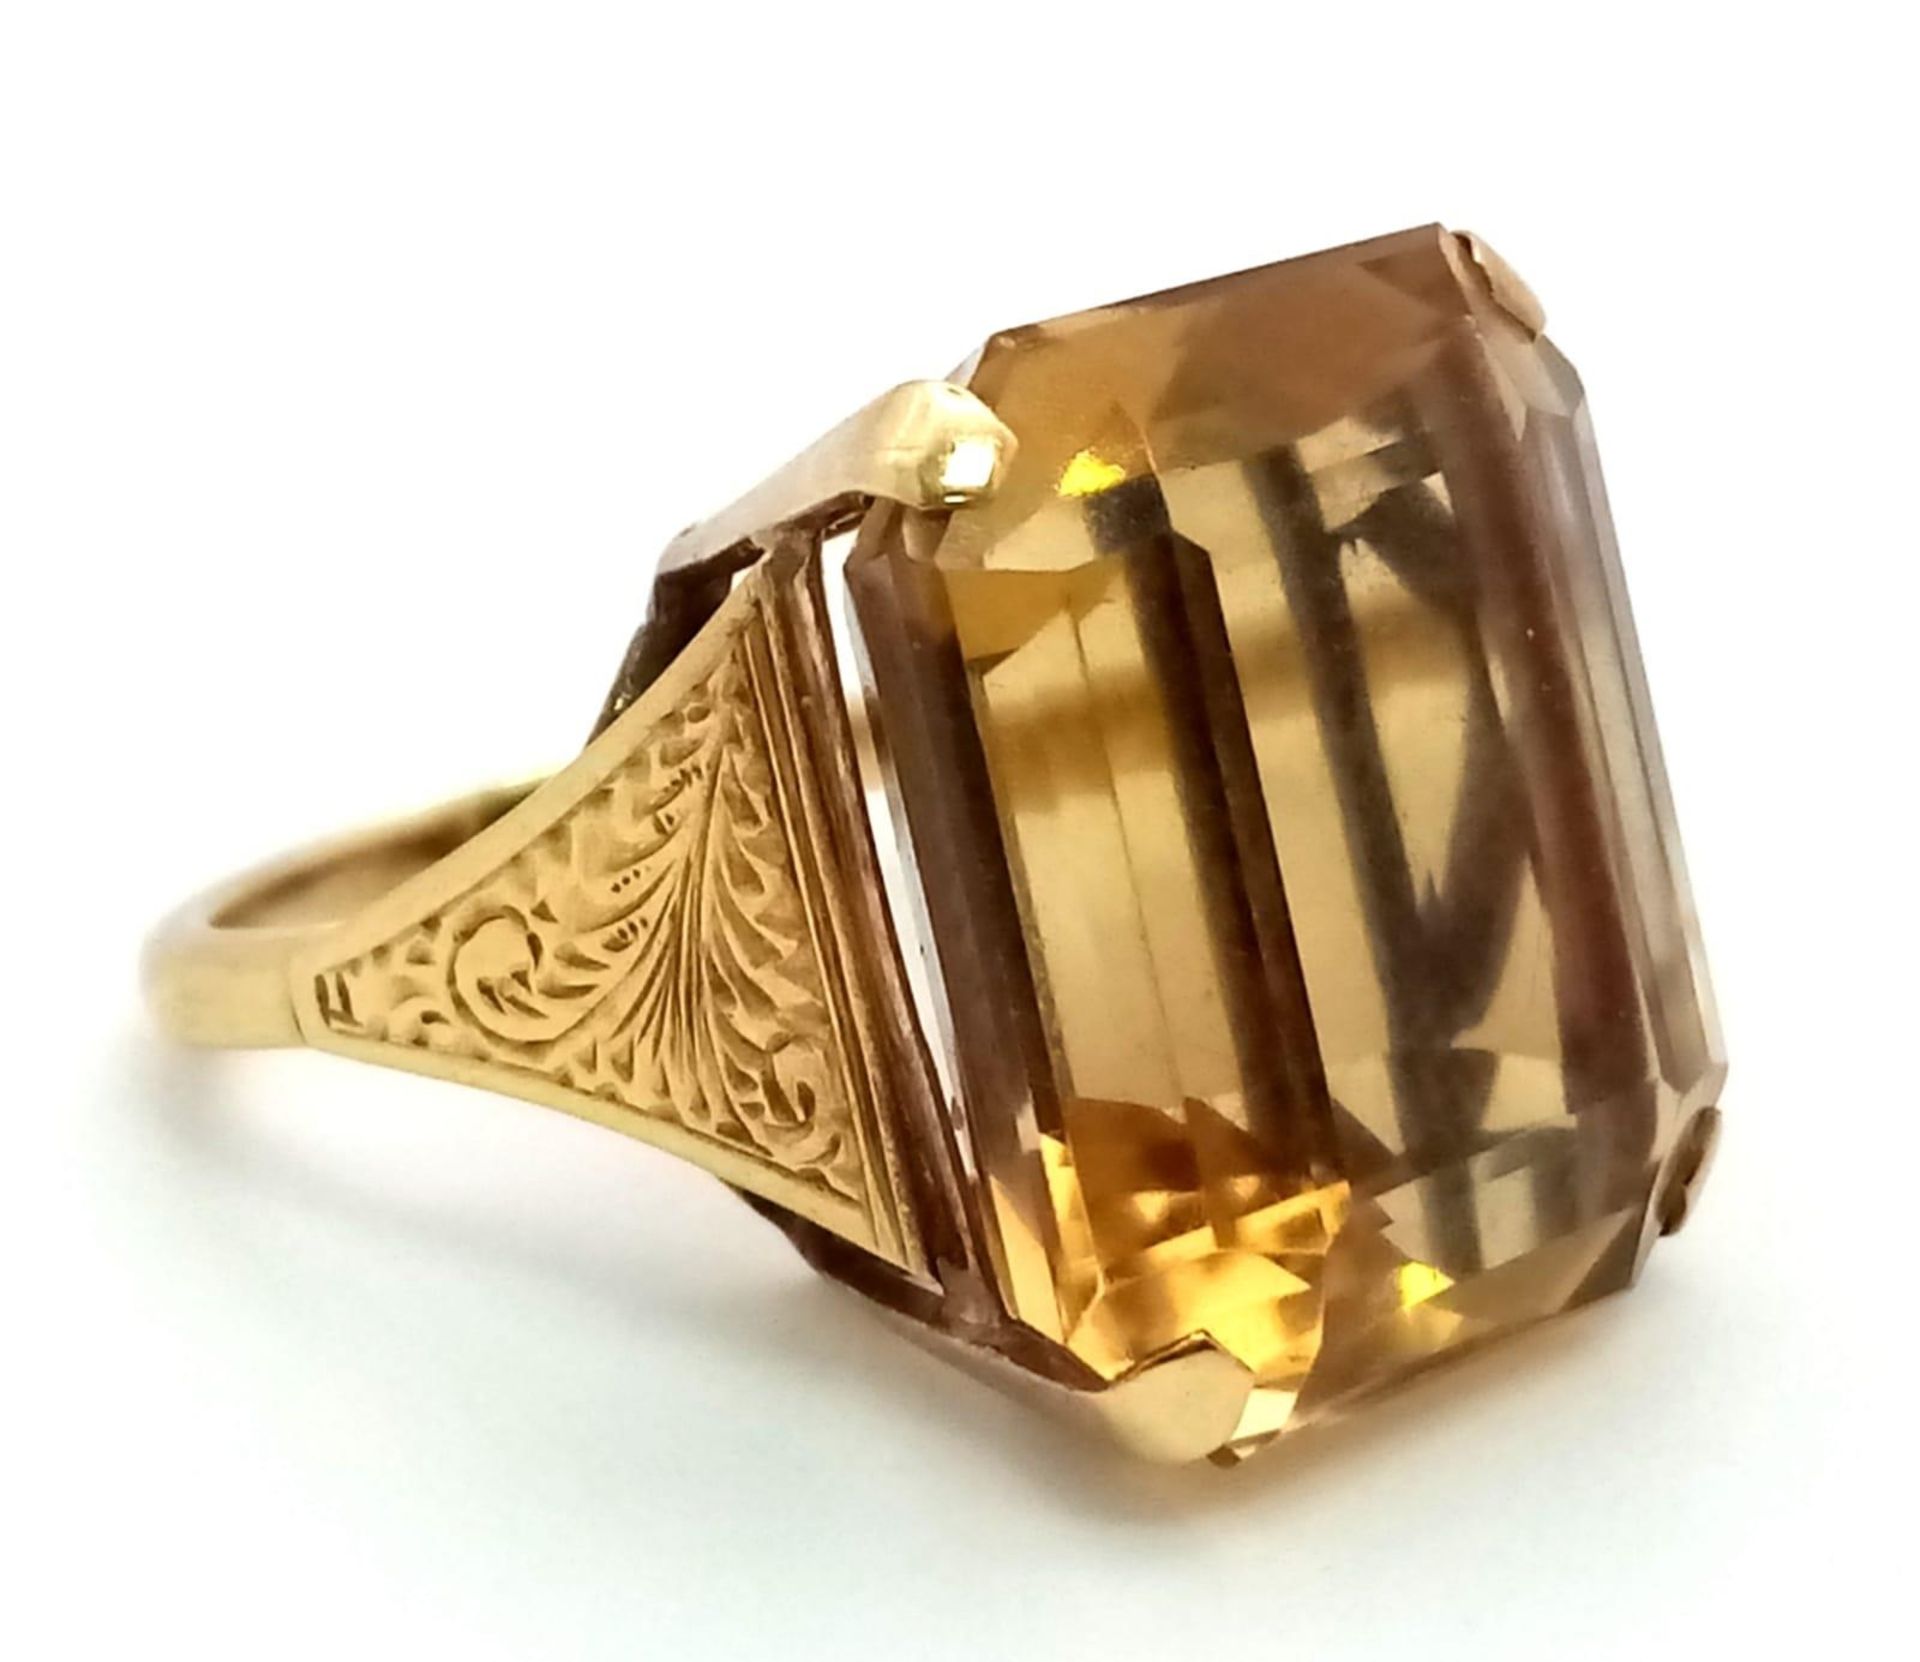 18k yellow gold emerald cut citrine vintage style ring 9.1g, size J 1/2 (citrine: 18mm X 15mm)